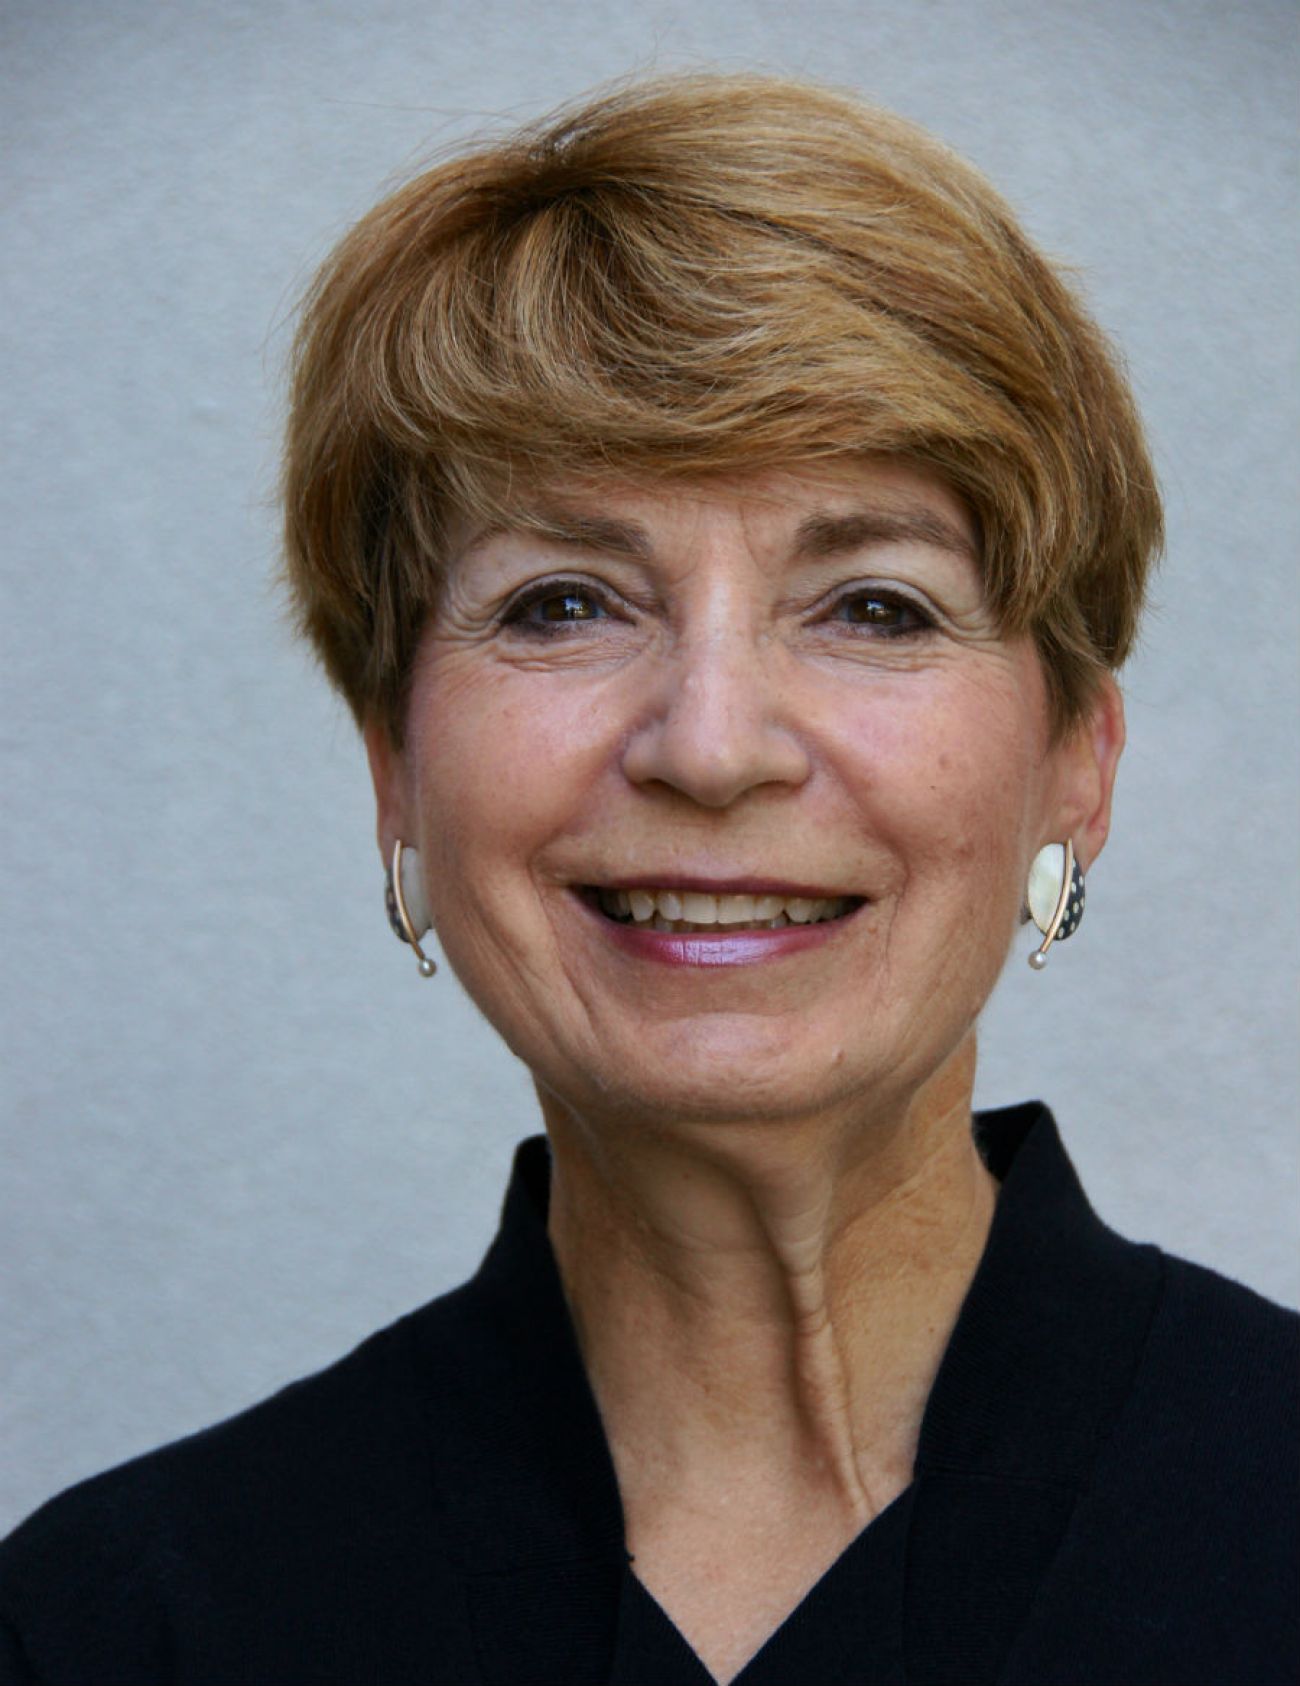 Gilda Jacobs, president and CEO of the Michigan League for Public Policy